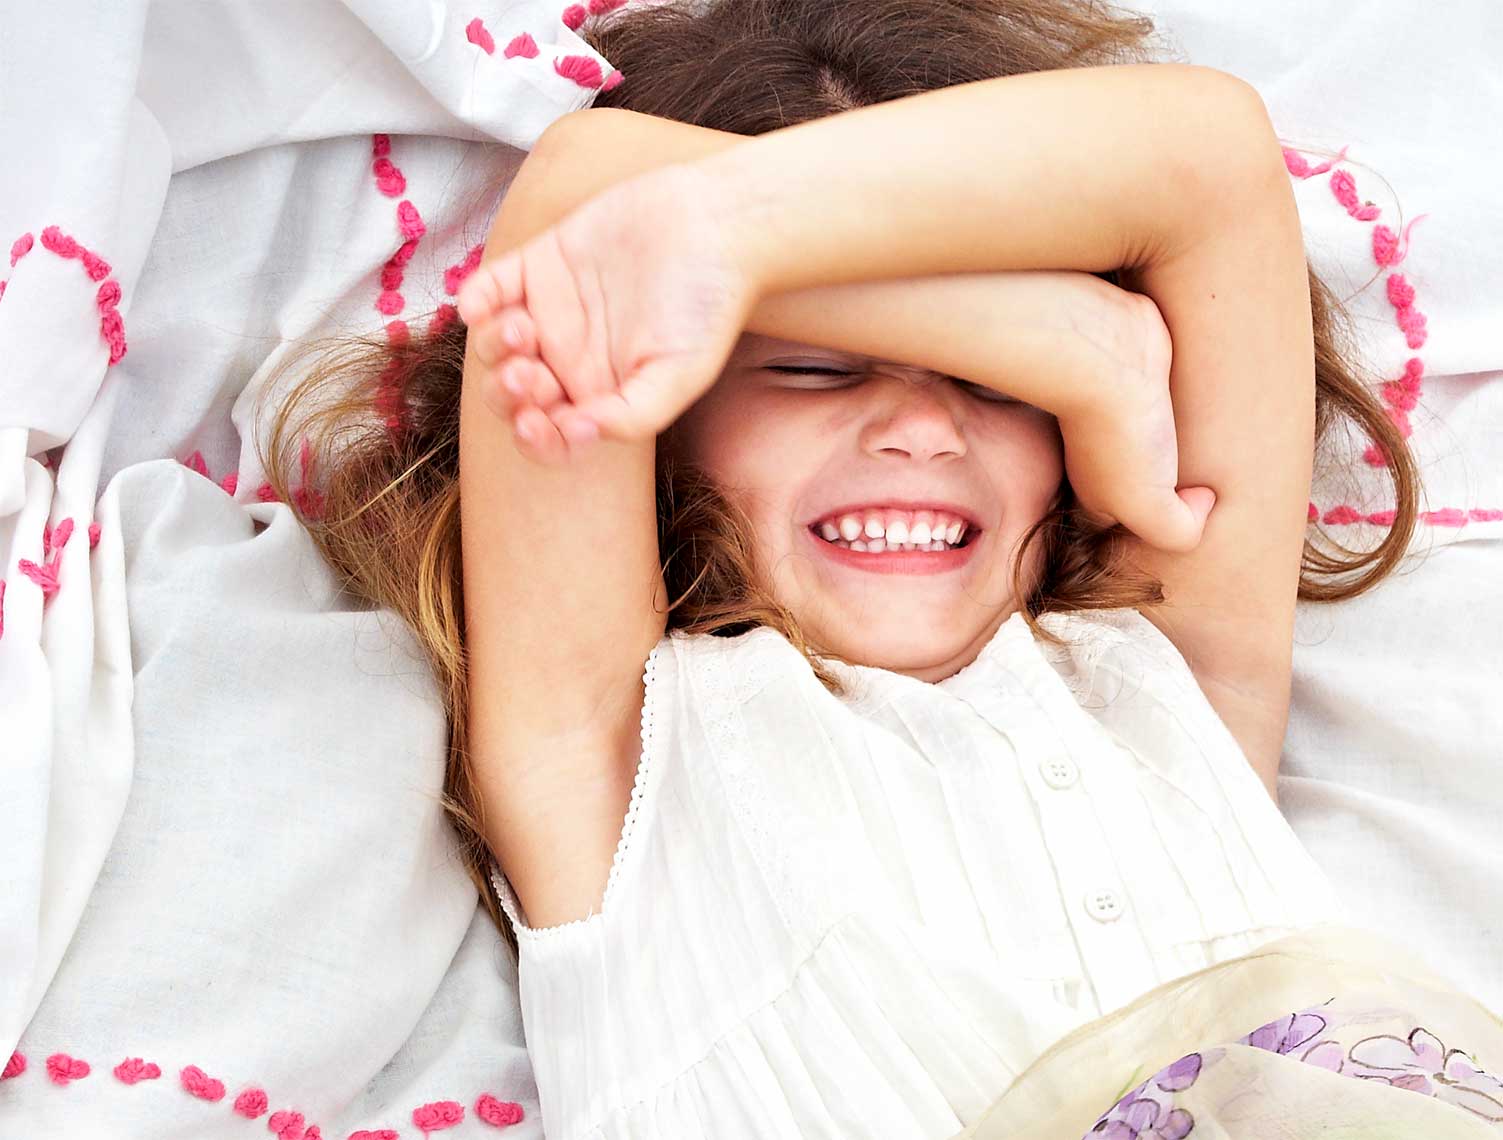 Outdoor lifestyle photograph of a young girl laying on a blanket covering her face while smiling.